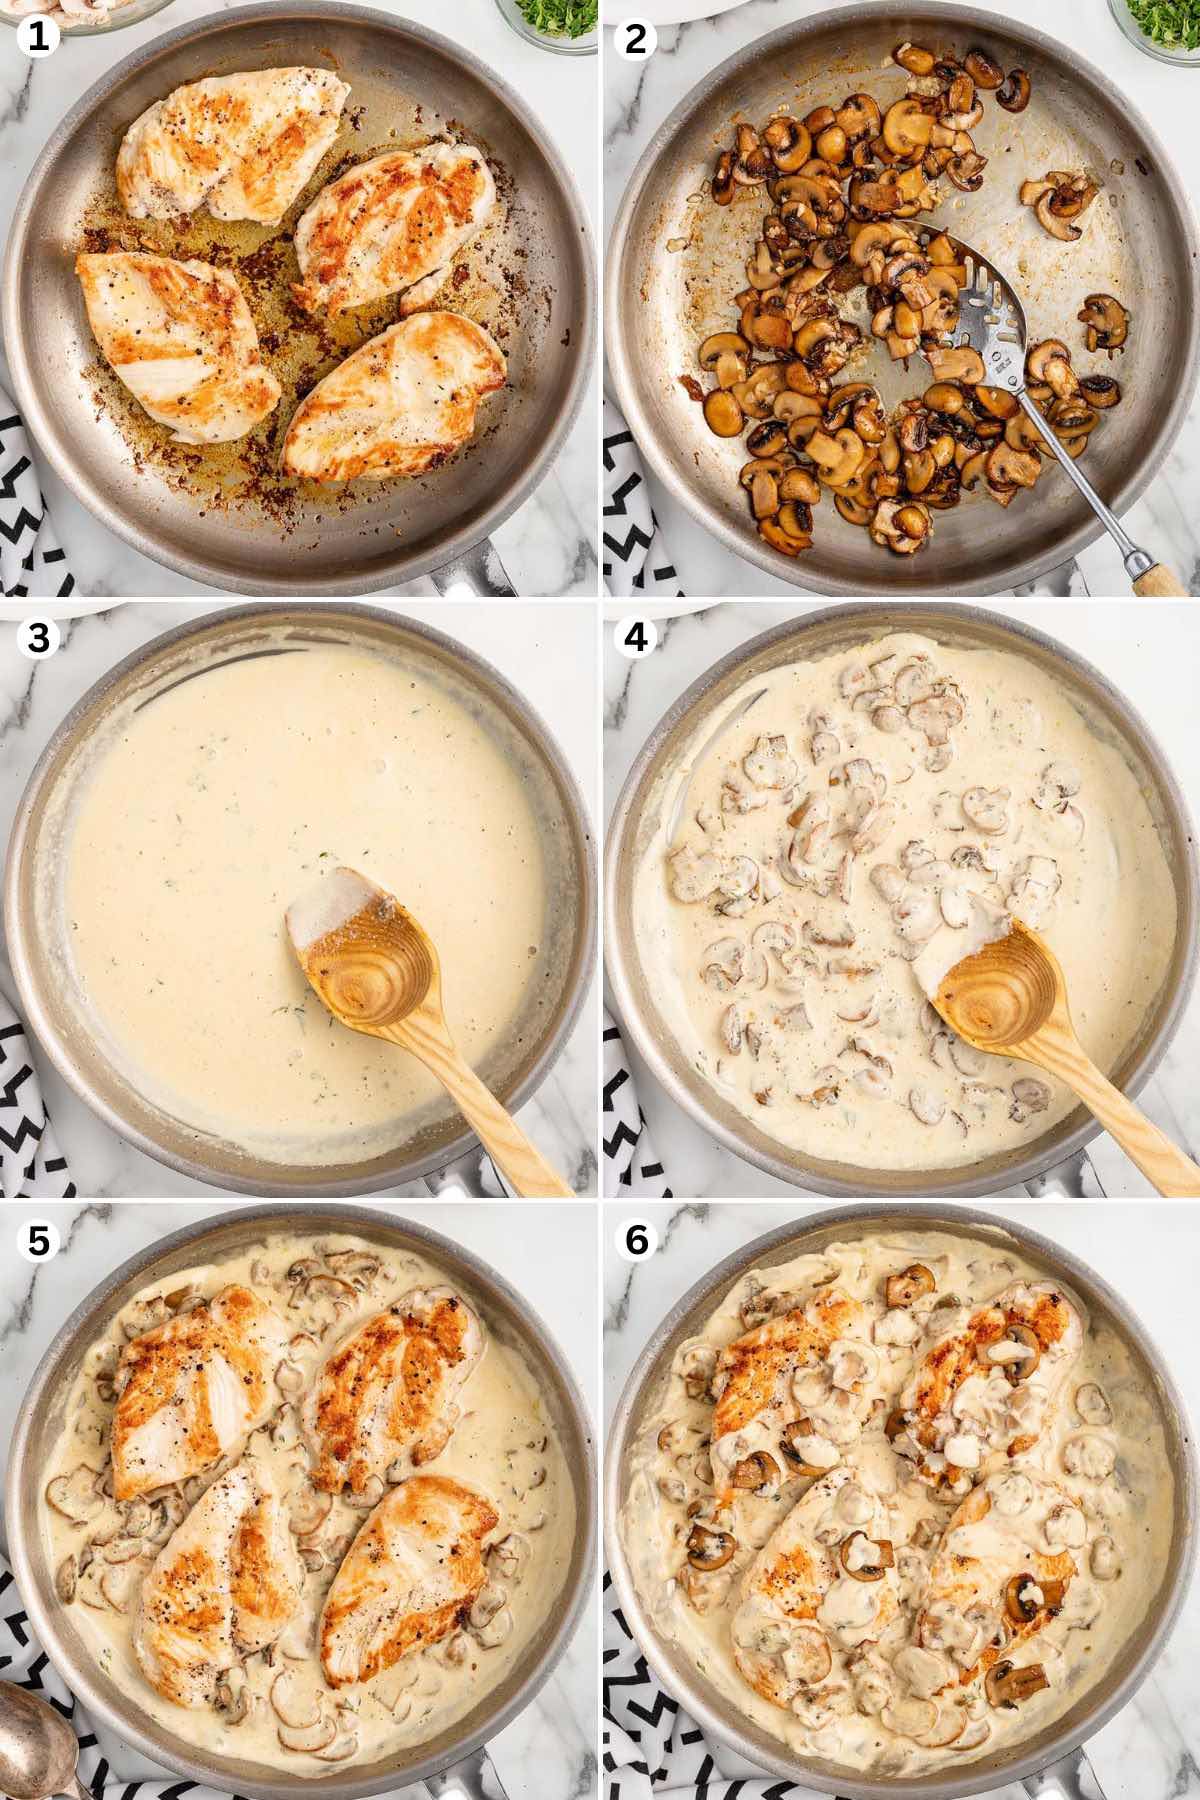 Cook the chicken breast. Add the mushroom and cook until dark golden brown. Add the heavy cream and other ingredients. Add the mushrooms back into the skillet. Add the chicken to the skillet and spoon the sauce and mushrooms over the chicken.